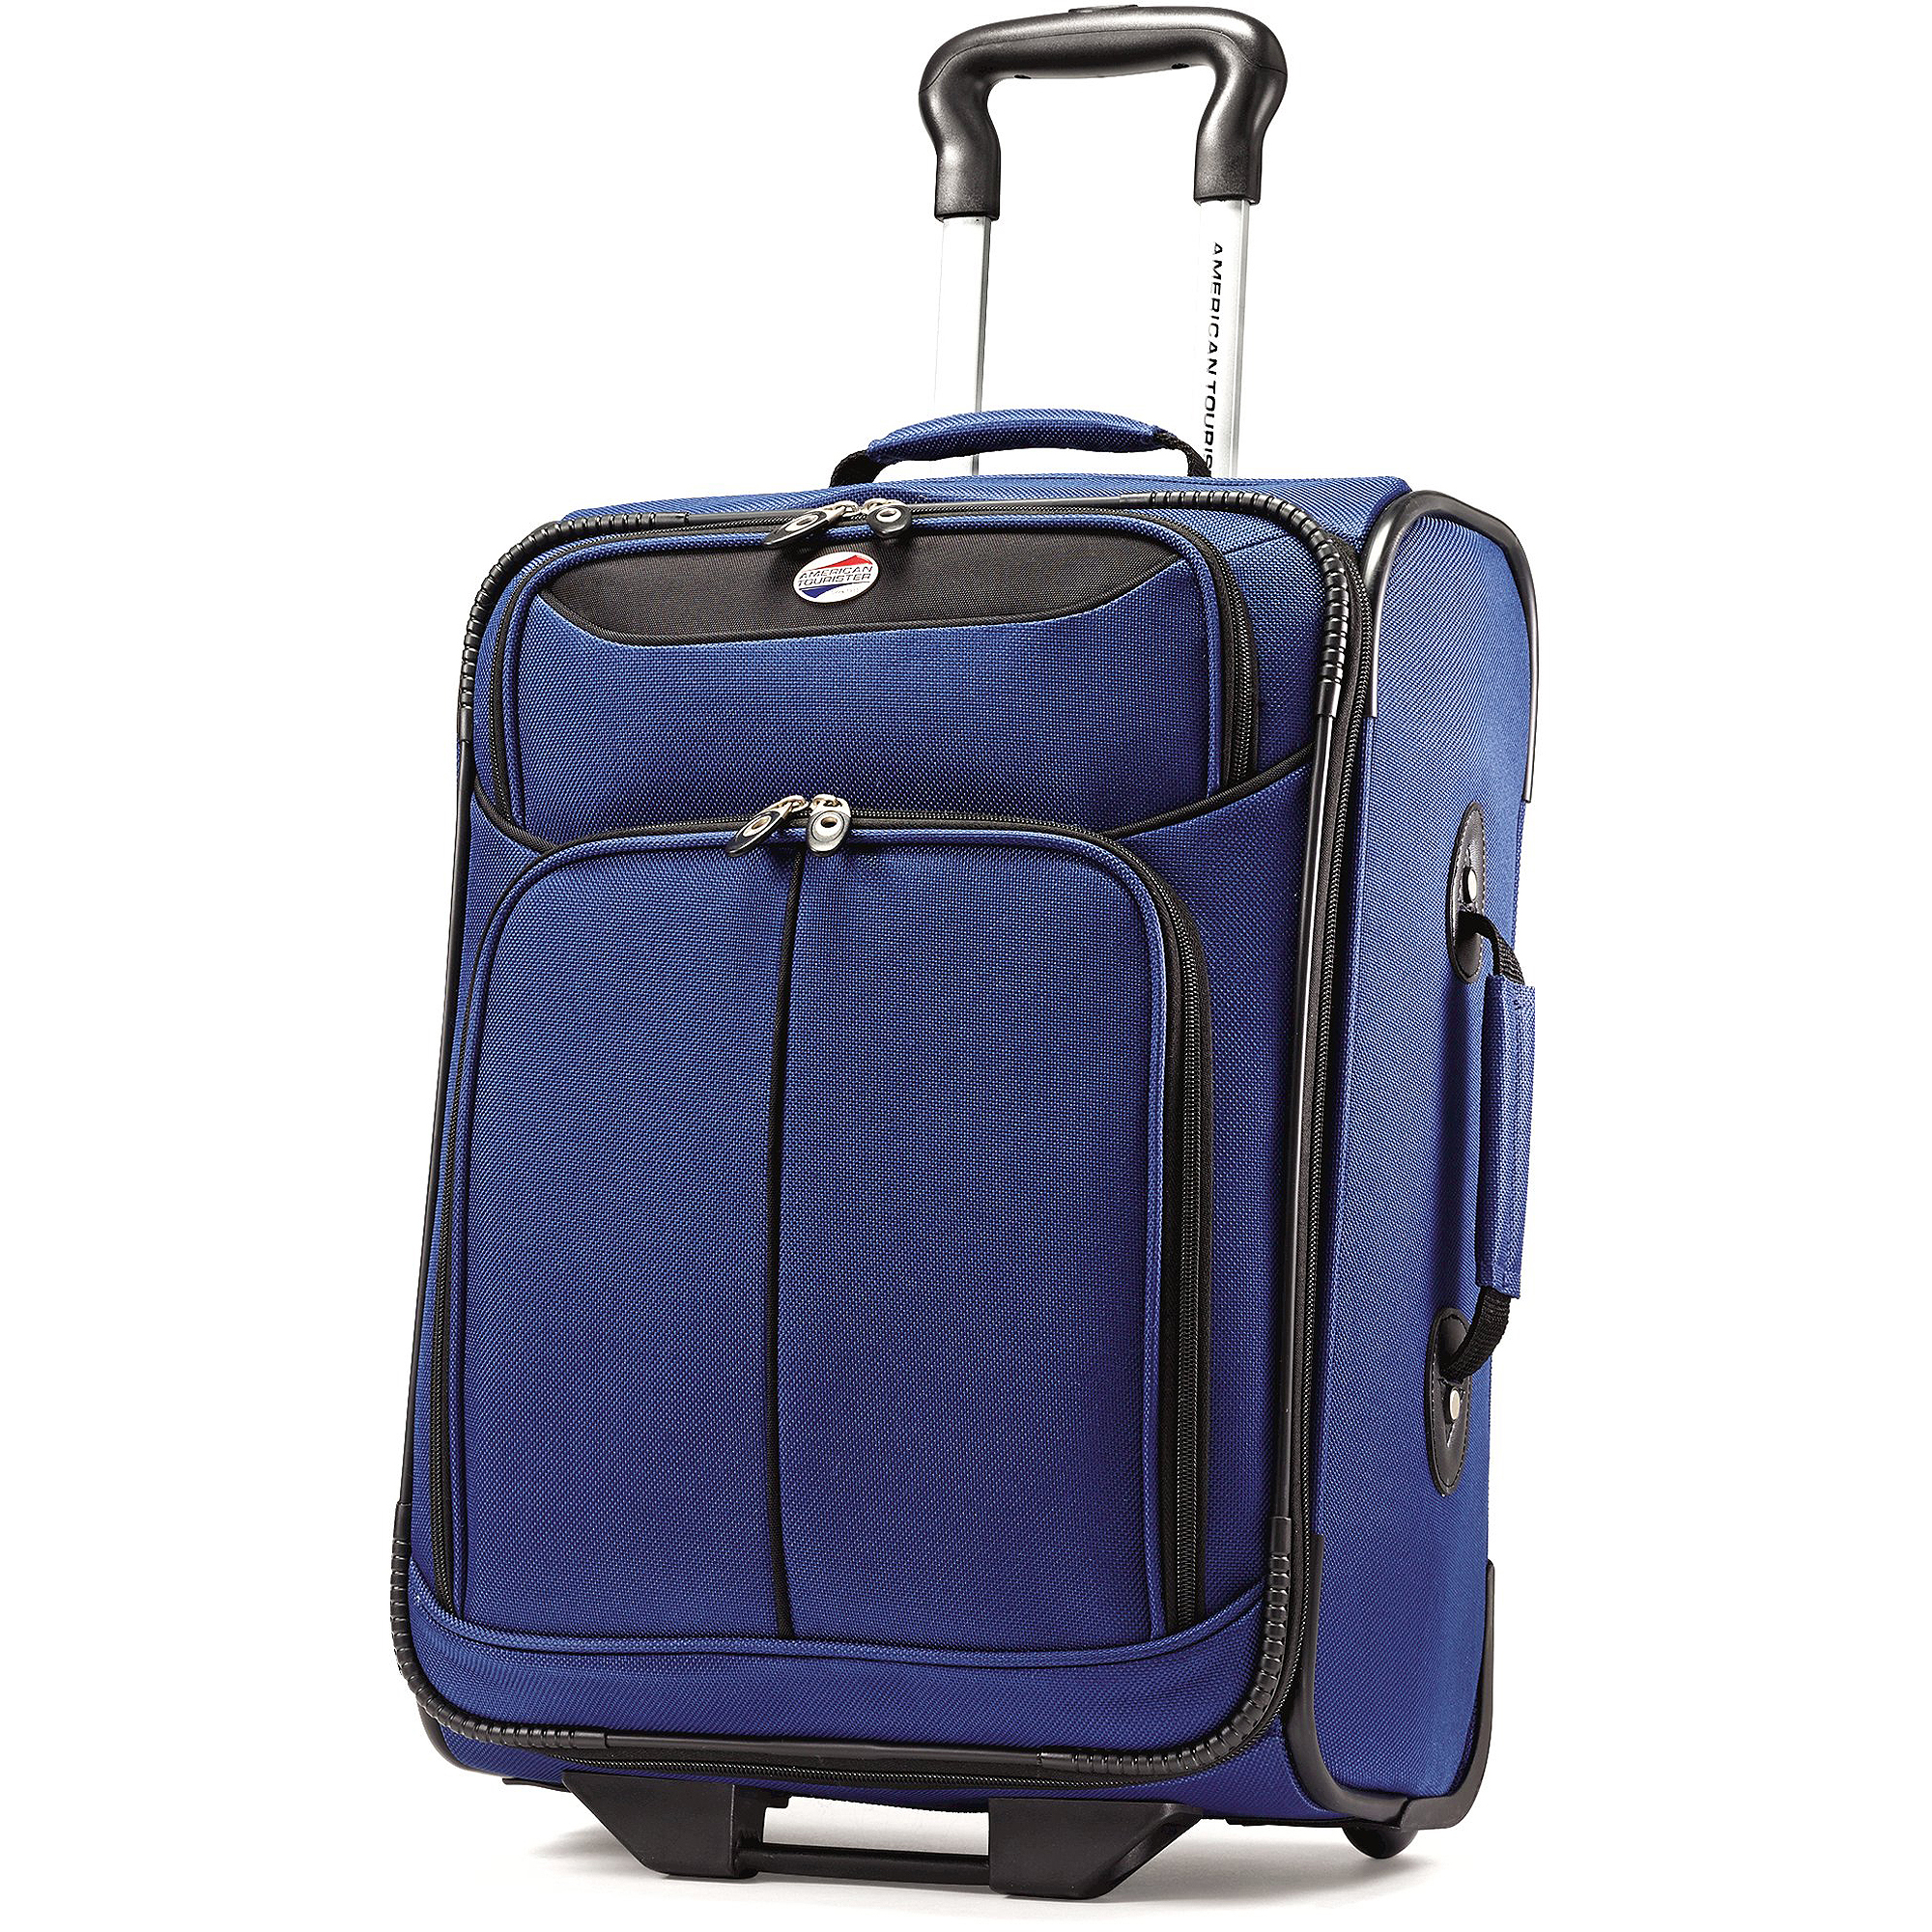 American Tourister 4-Piece Luggage Set - image 2 of 7